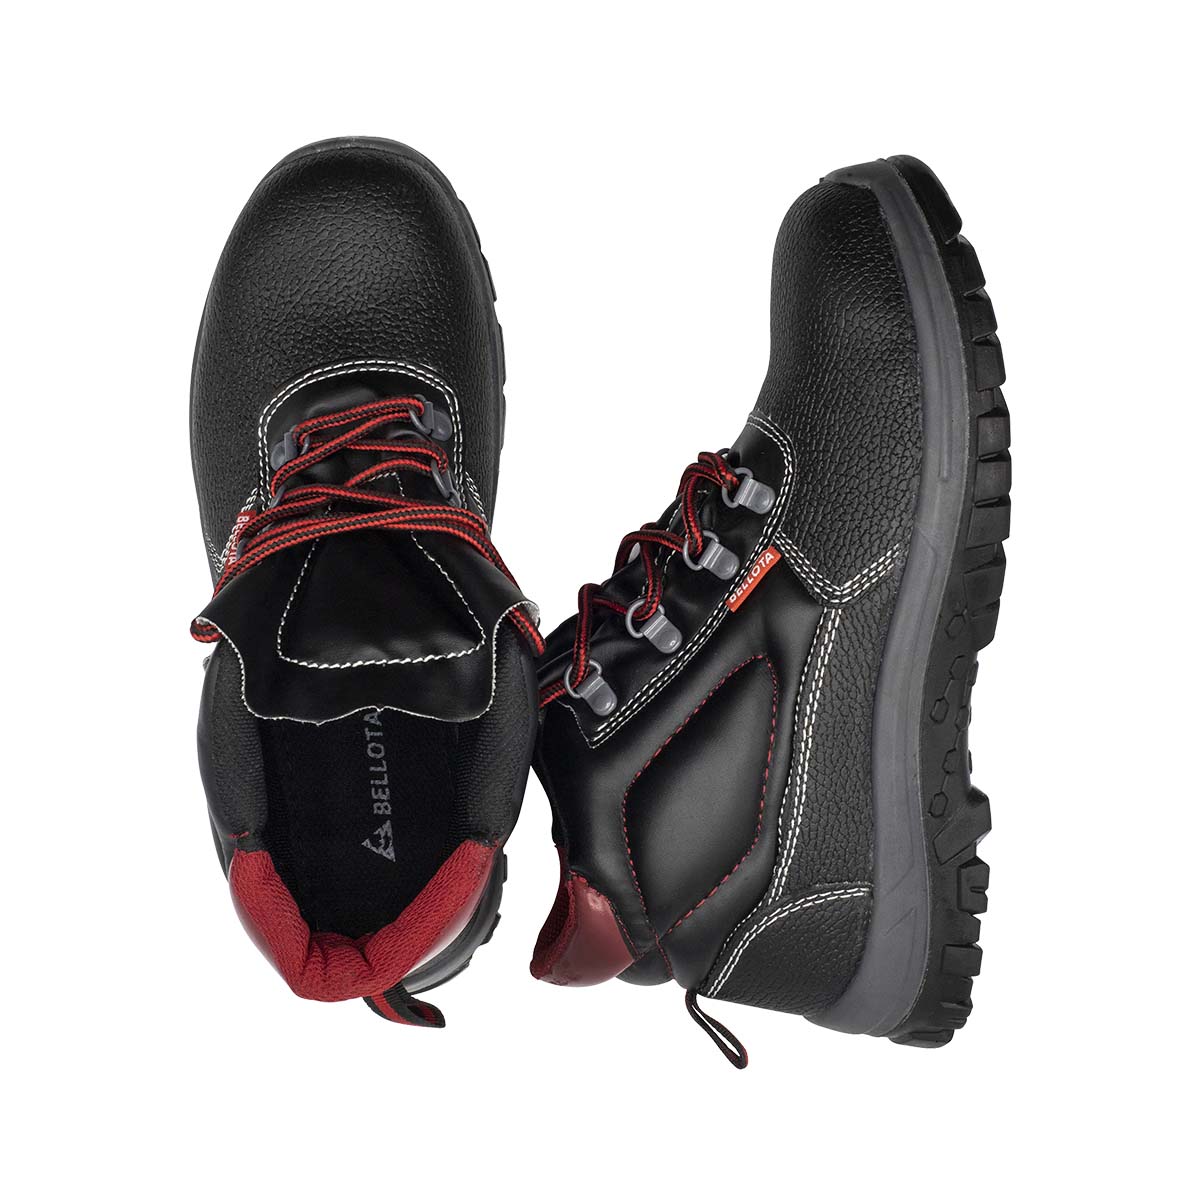 Vista Safety Boots Bellota 72300 Black &amp; Red Leather S3